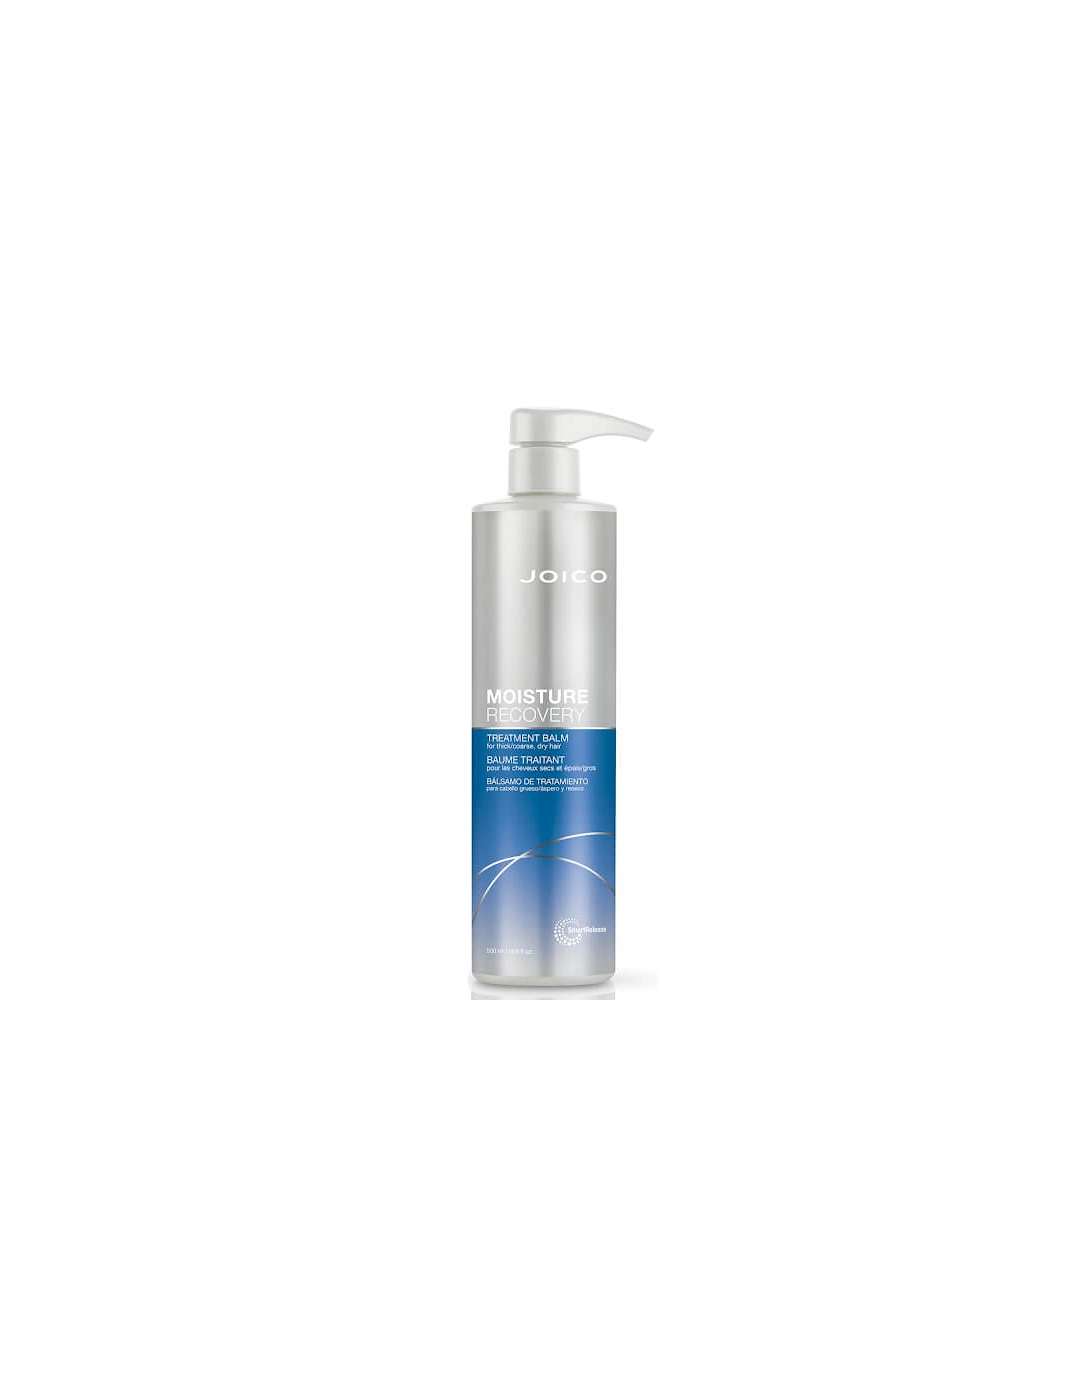 Moisture Recovery Treatment Balm 500ml (Worth £43.80), 2 of 1